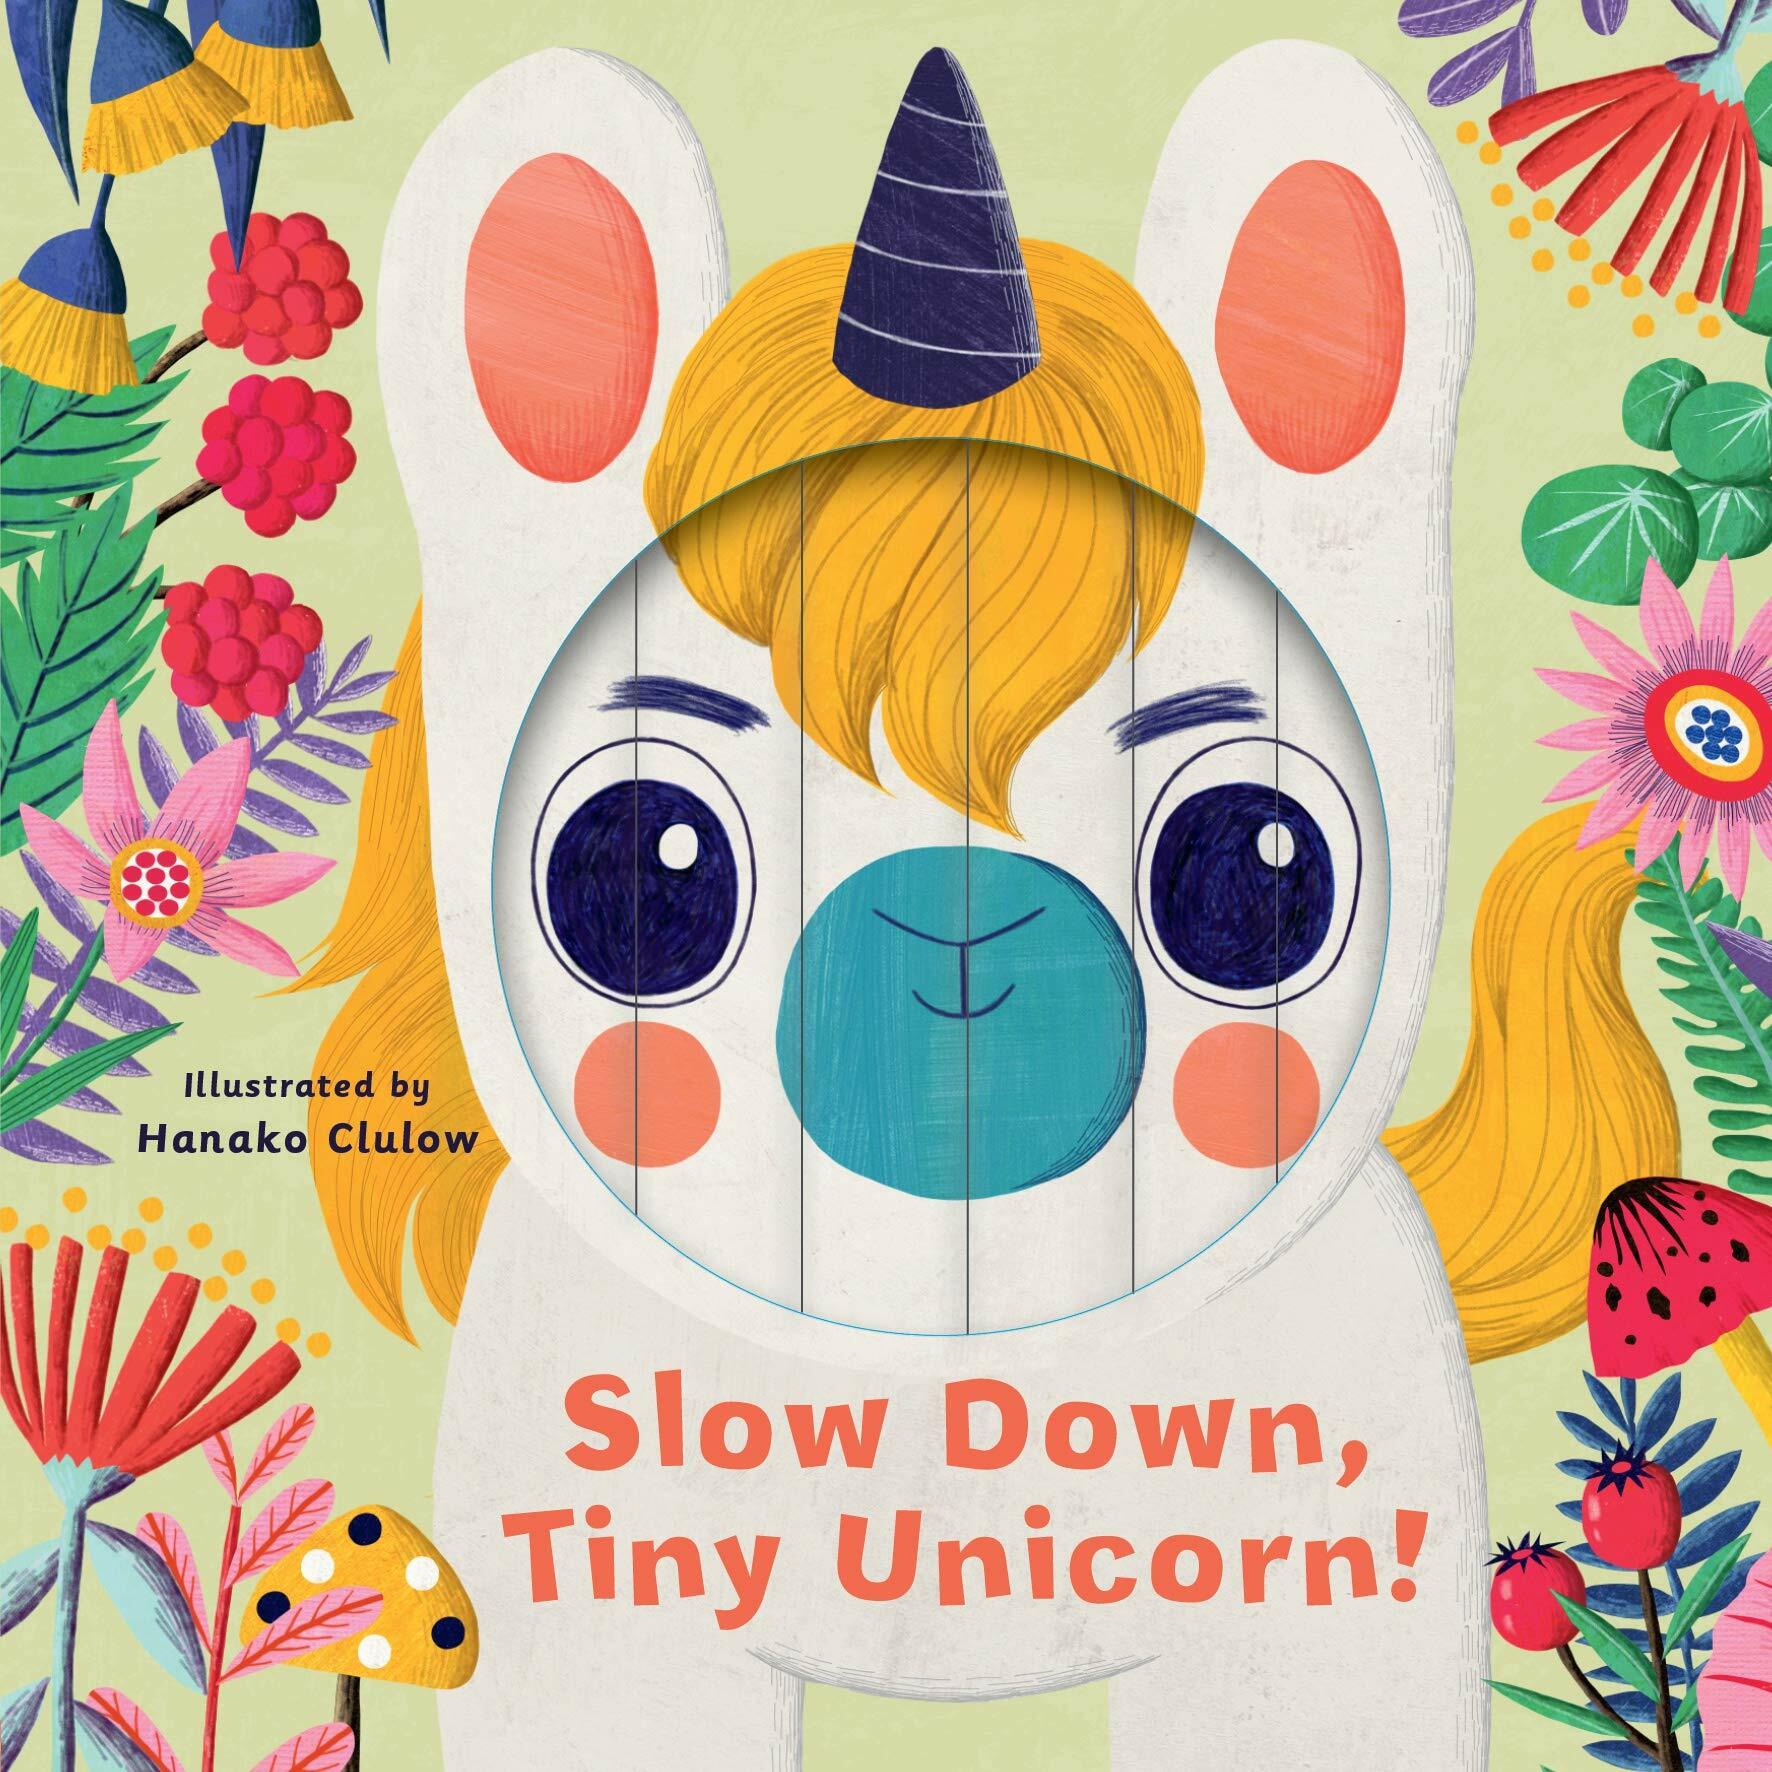 Little Faces: Slow Down, Tiny Unicorn! (Board Book)